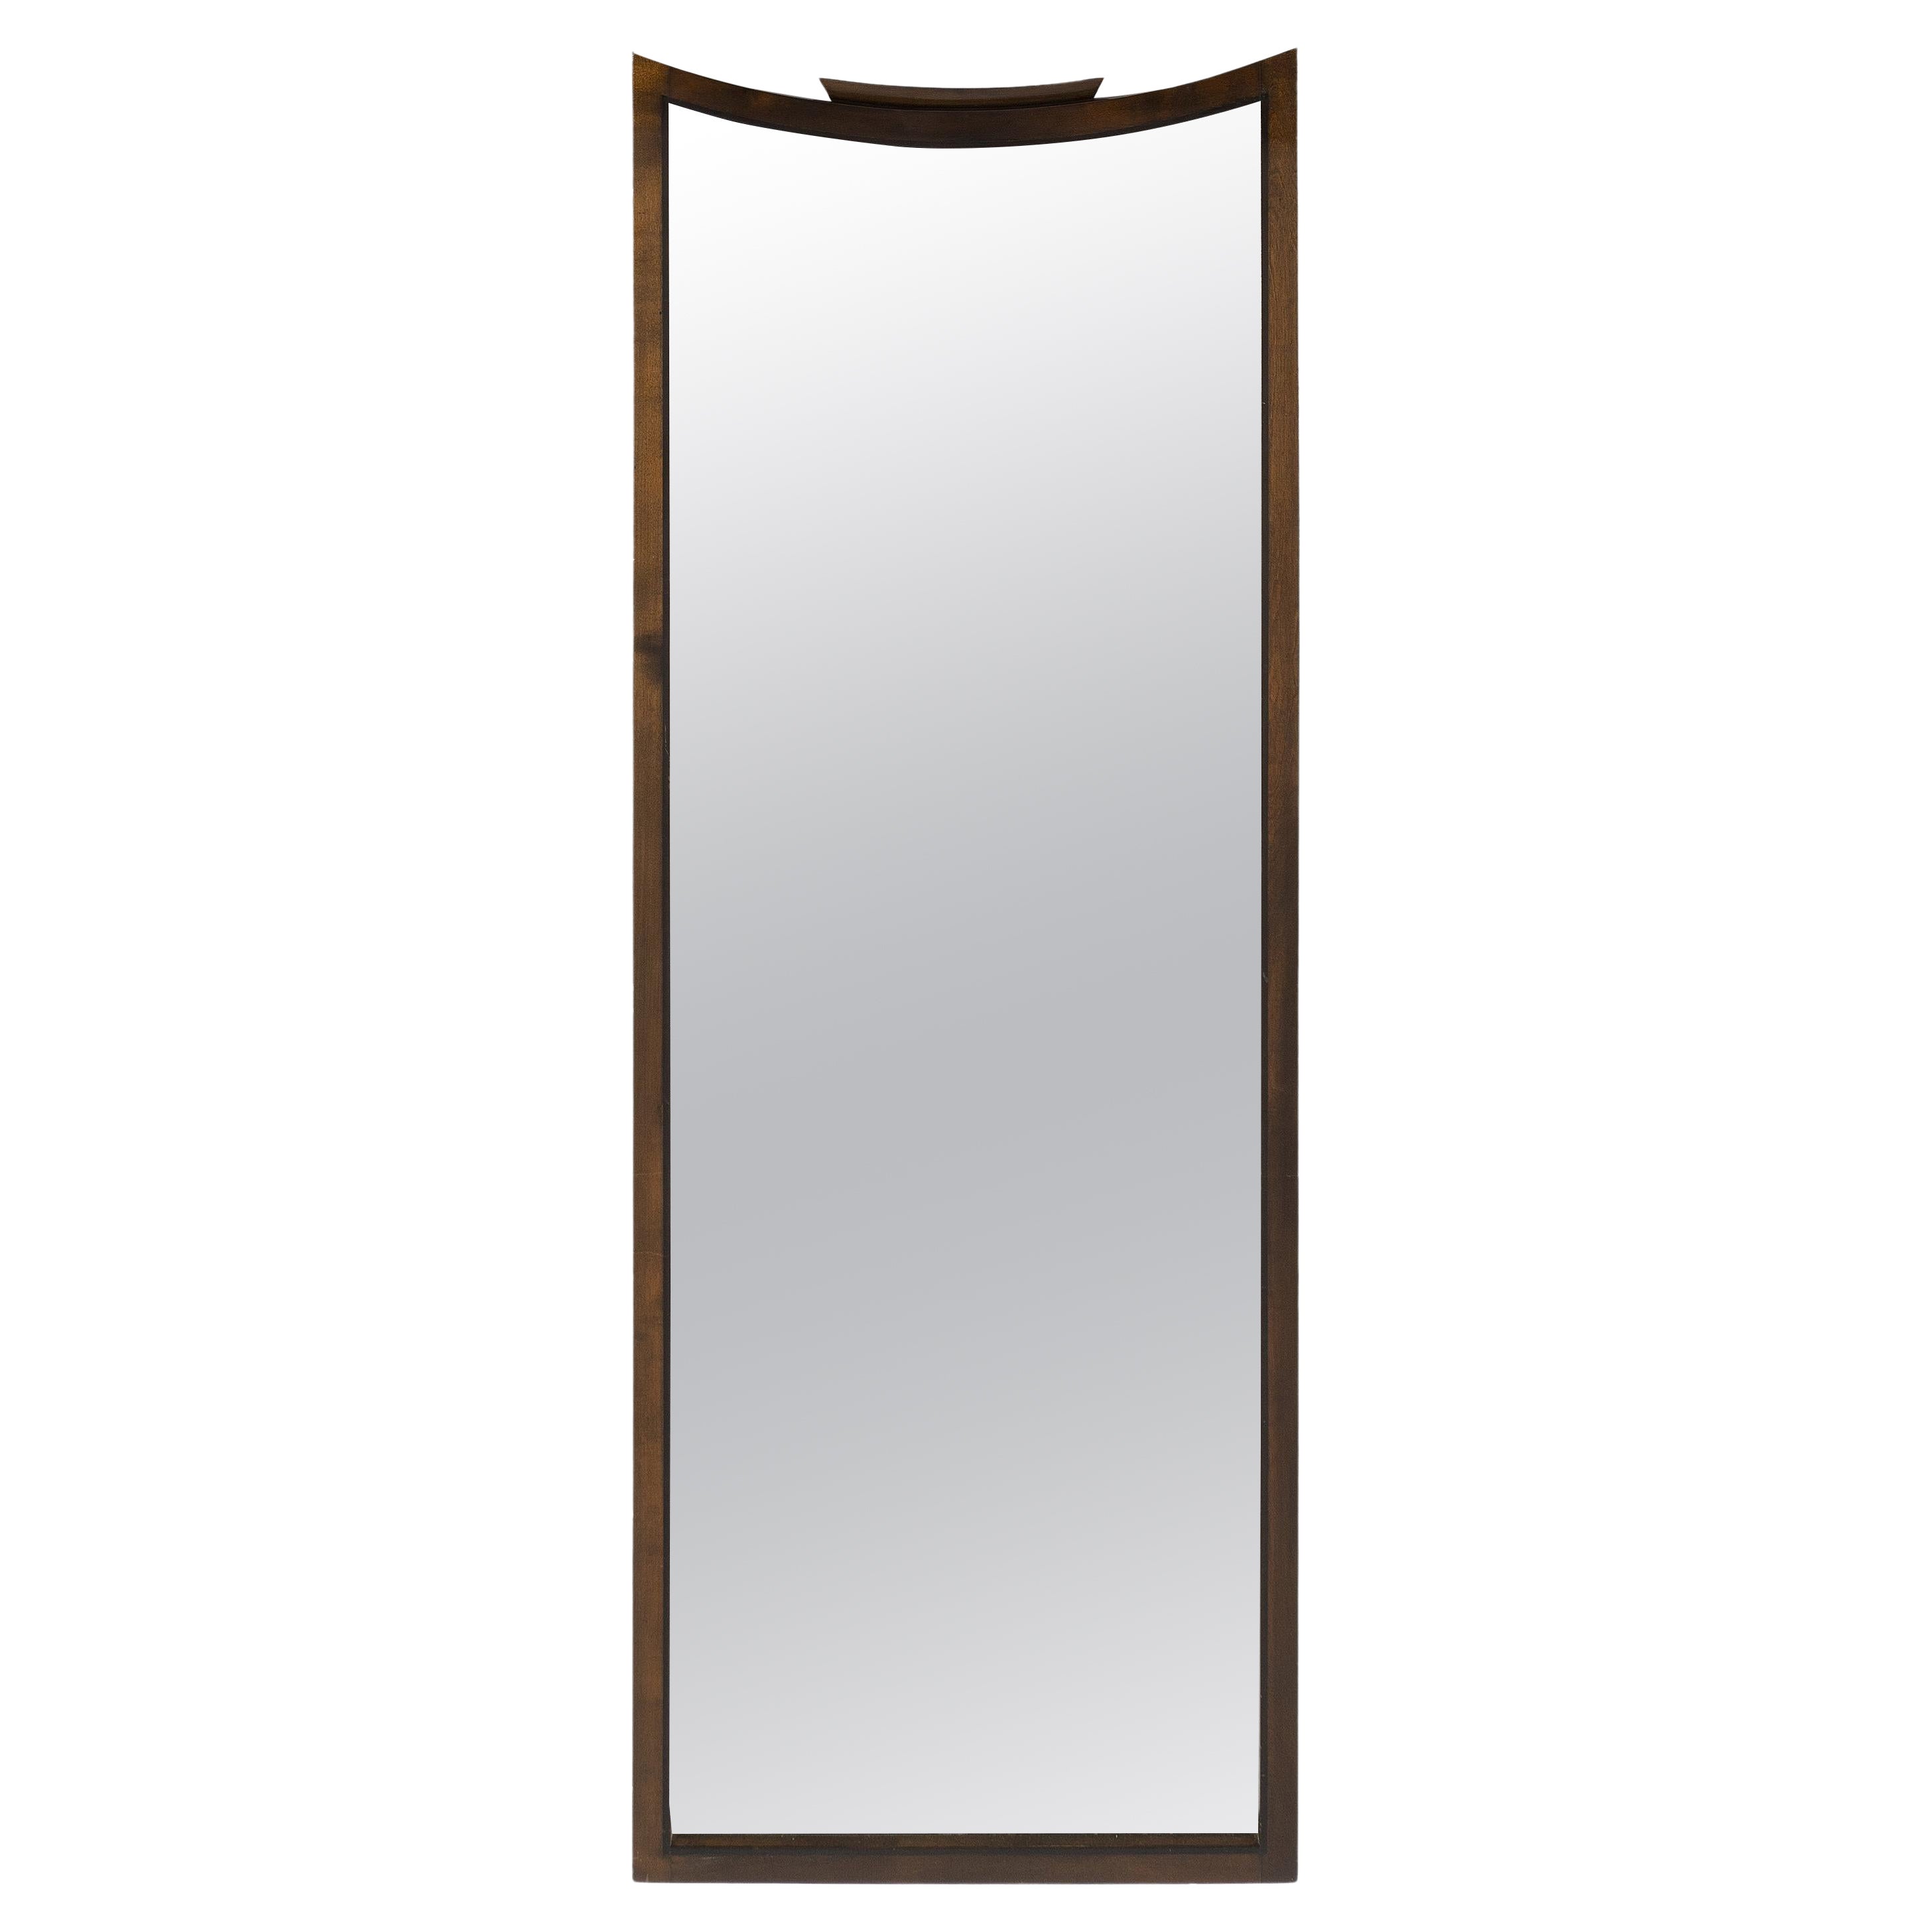 Large Art Deco Mirror, Walnut and Mahogany Frame, Antique Glass, Sweden 1930s.  For Sale